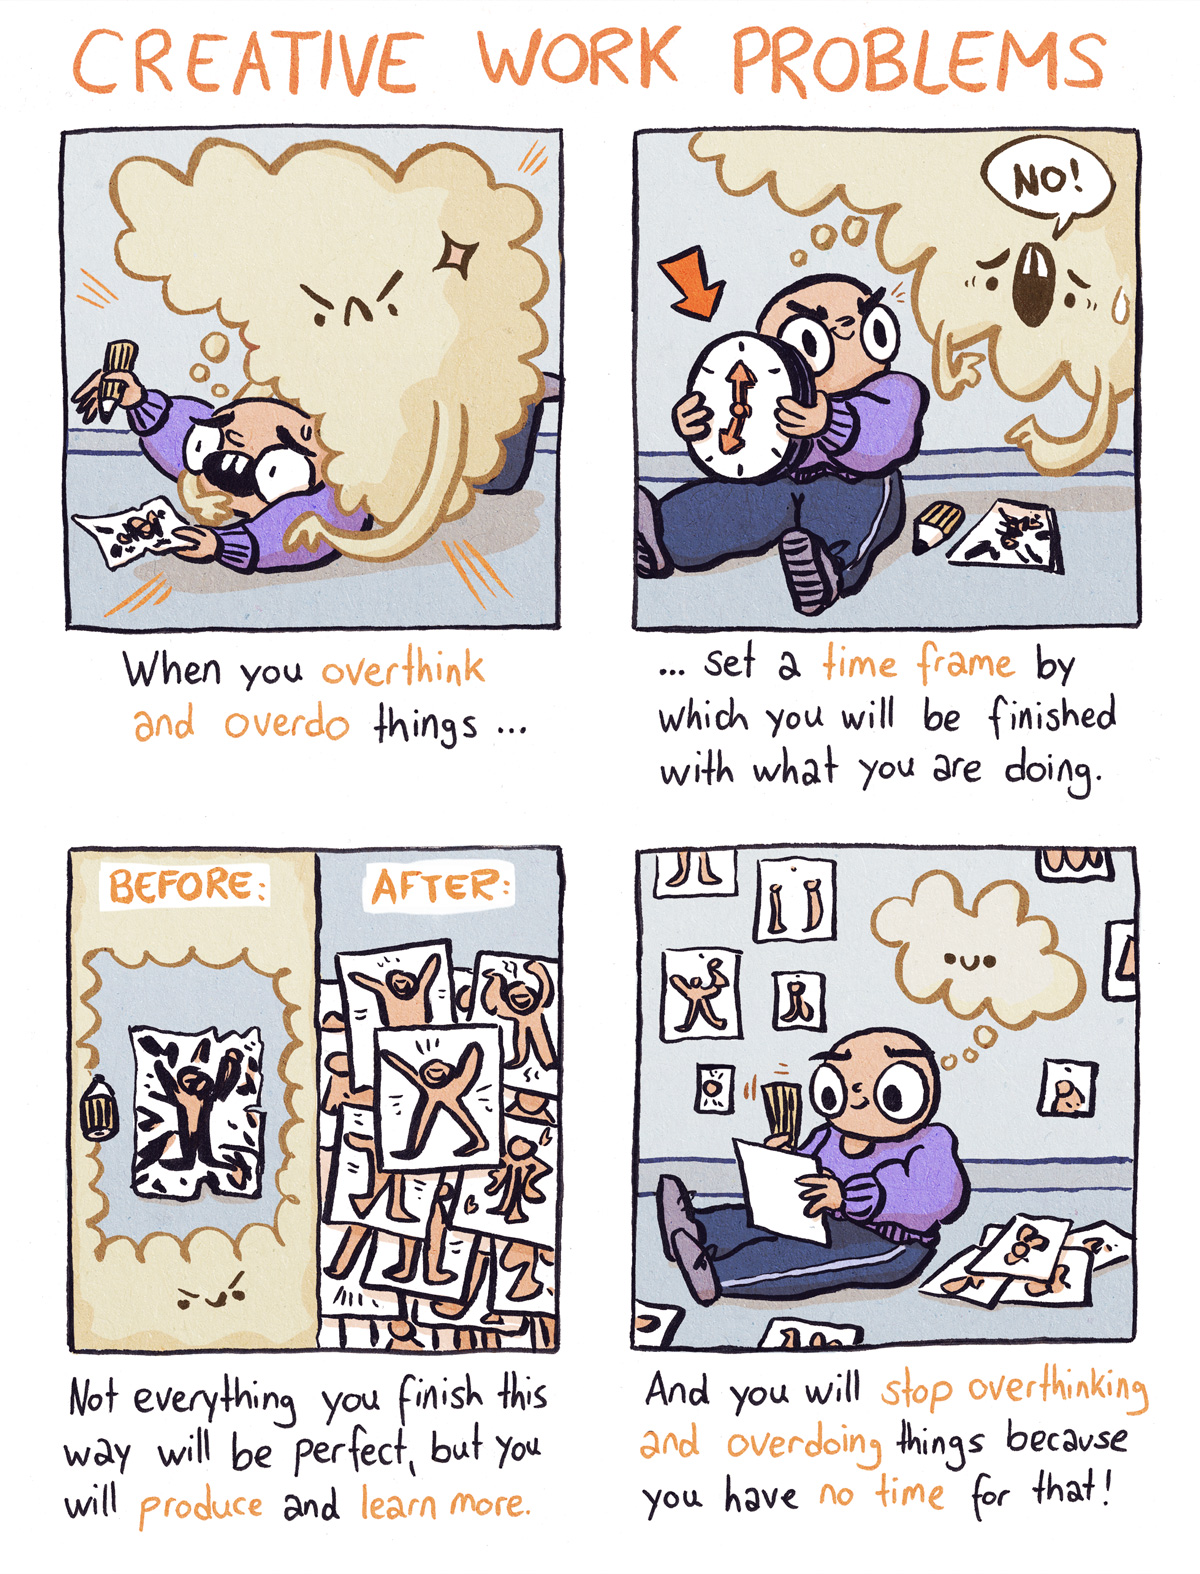 Creative Work Problems Overdoing and Overthinking